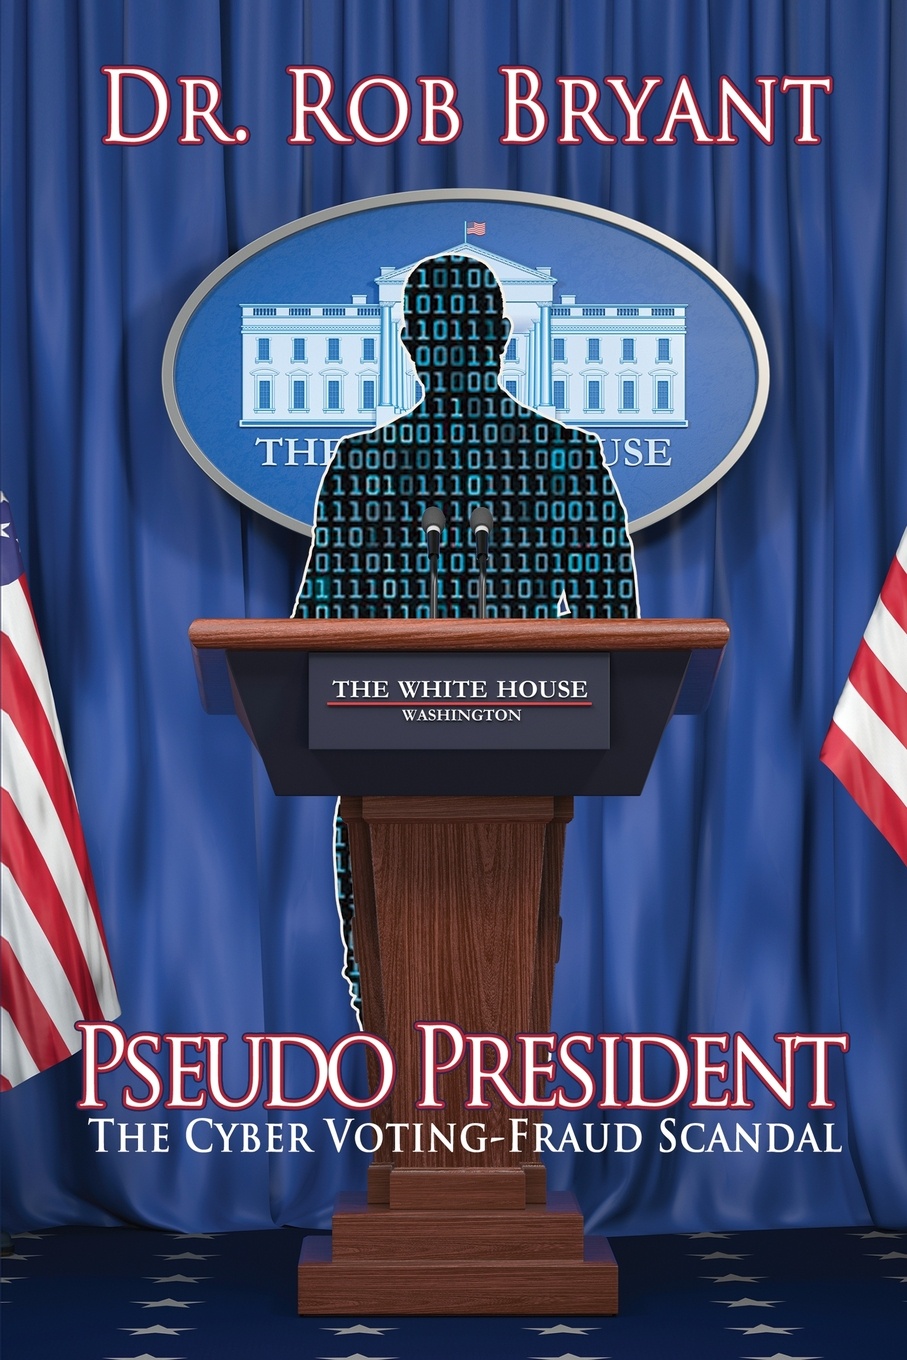 Pseudo President. The Cyber Voting-Fraud Scandal